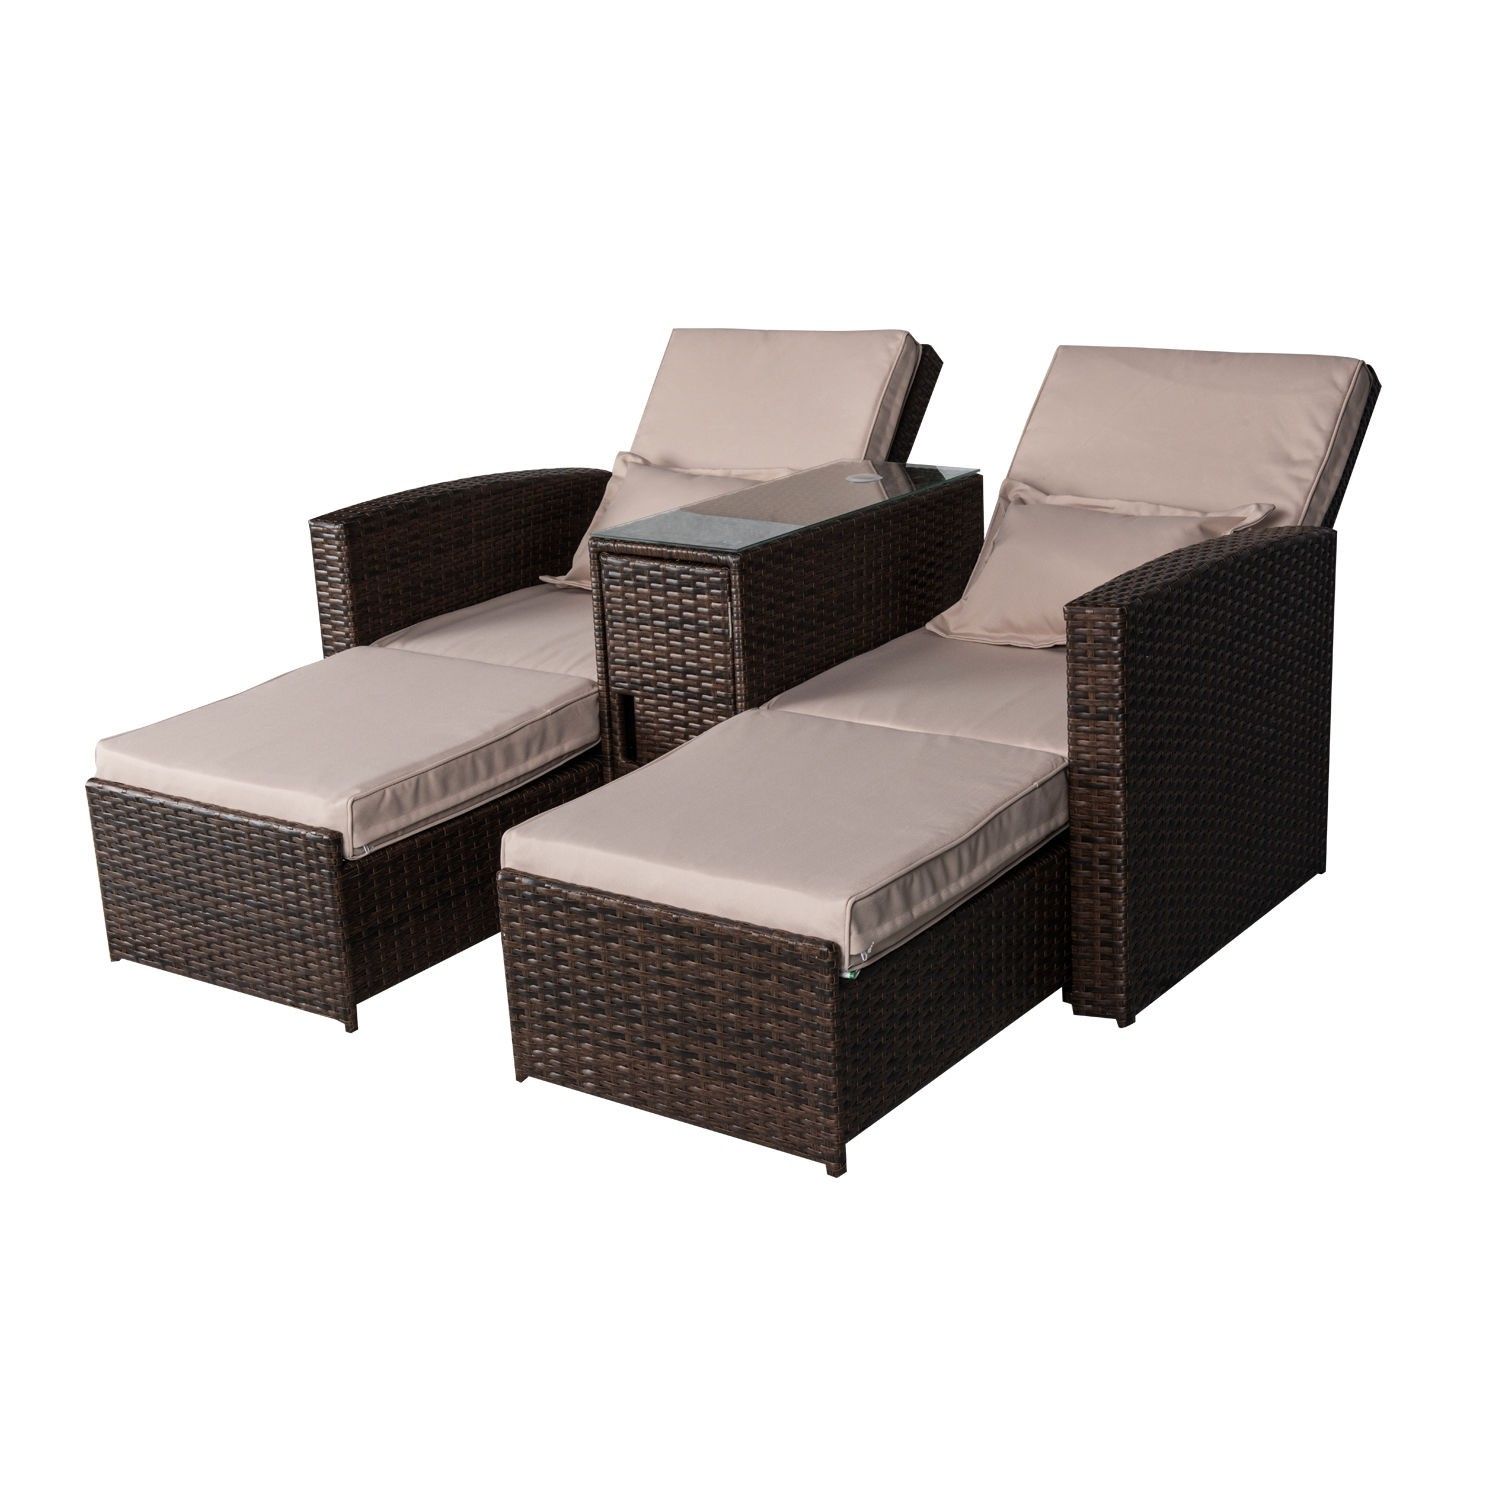 Outsunny 3 Piece Outdoor Rattan Wicker Chaise Lounge Intended For Colby Manual Reclining Sofas (View 14 of 15)